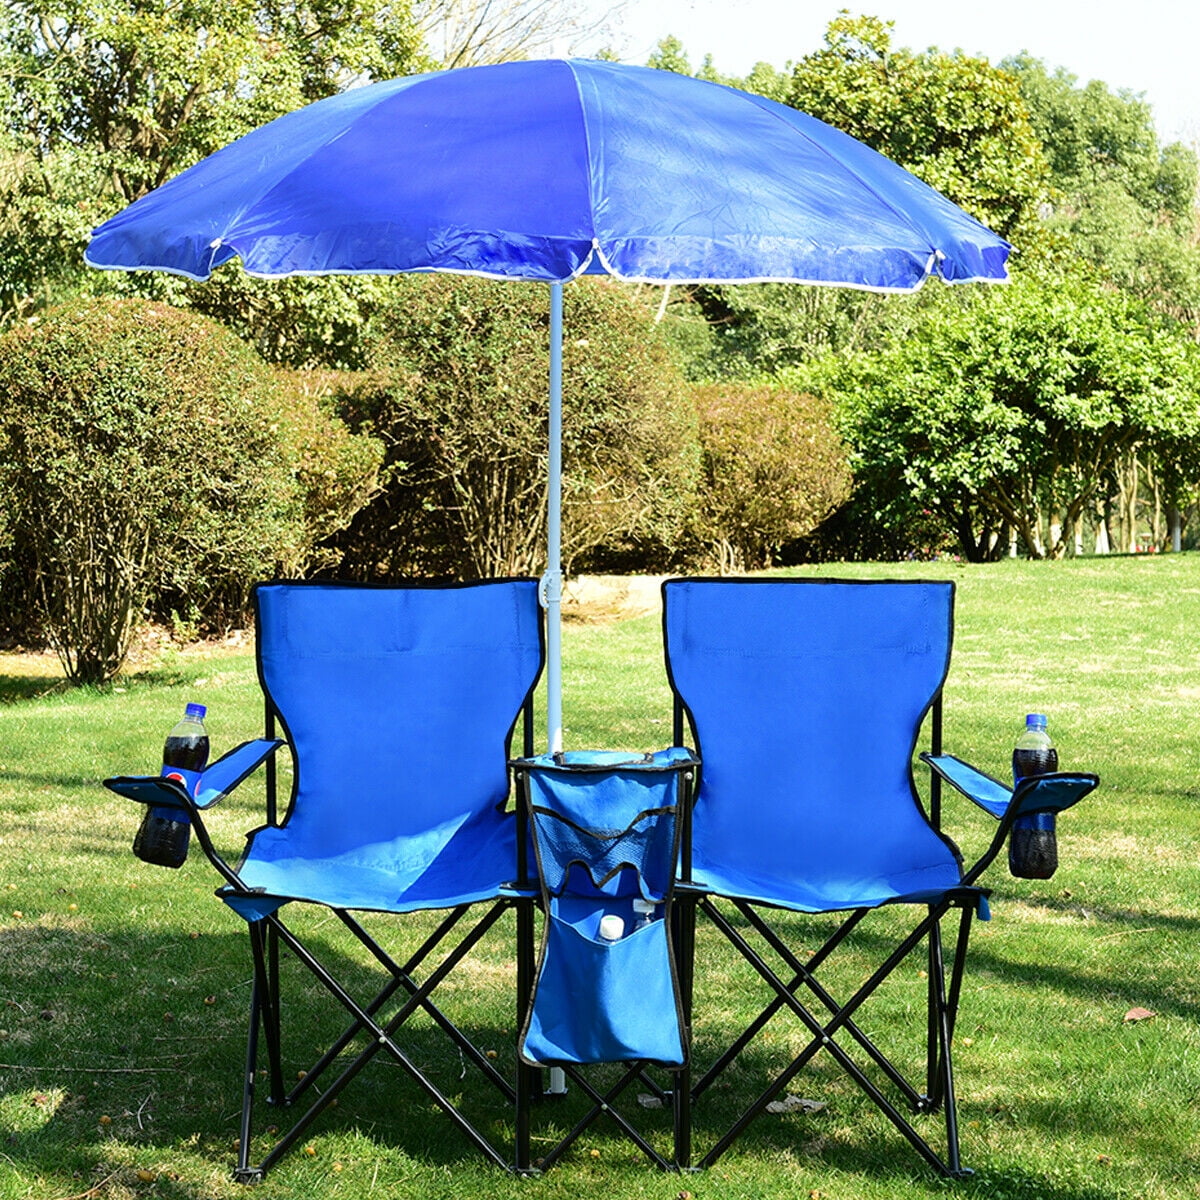 Double Folding Chair w/ Umbrella and Table Cooler Fold Up Beach Camping Chair 